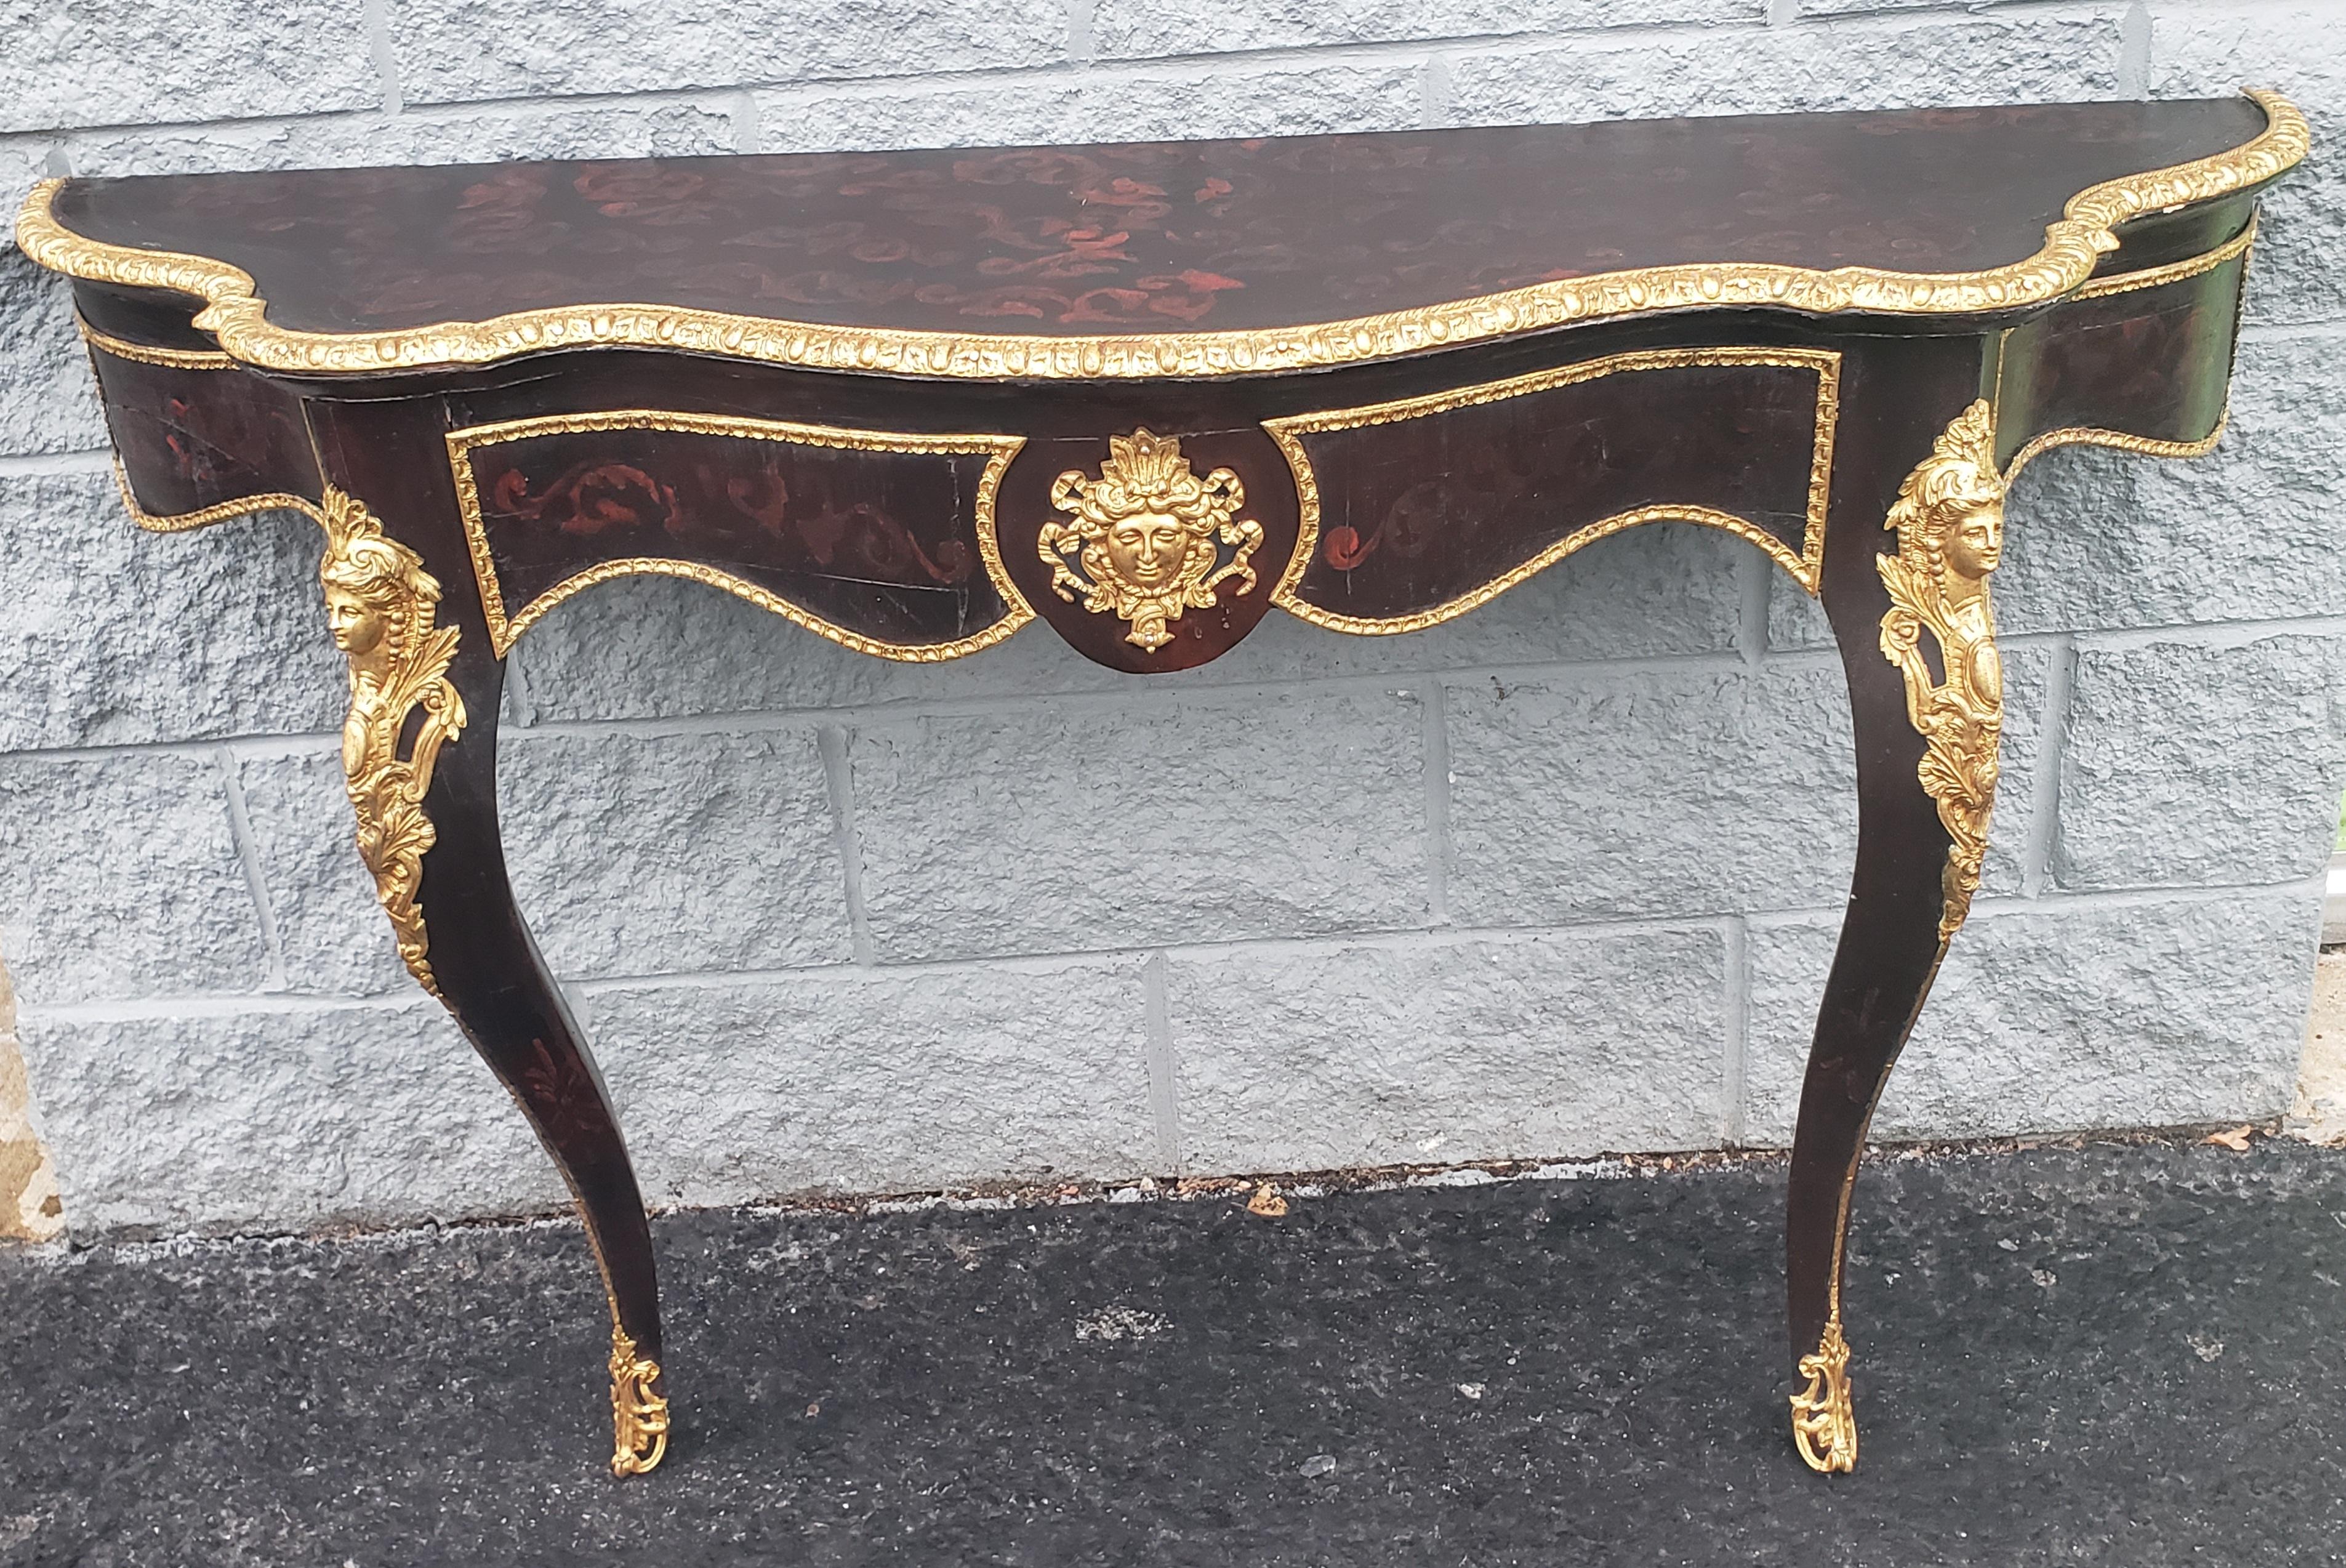 19th Century Large Louis Phillipe Ormolu & Giltwood French Console Wall Table, Circa 1840s For Sale